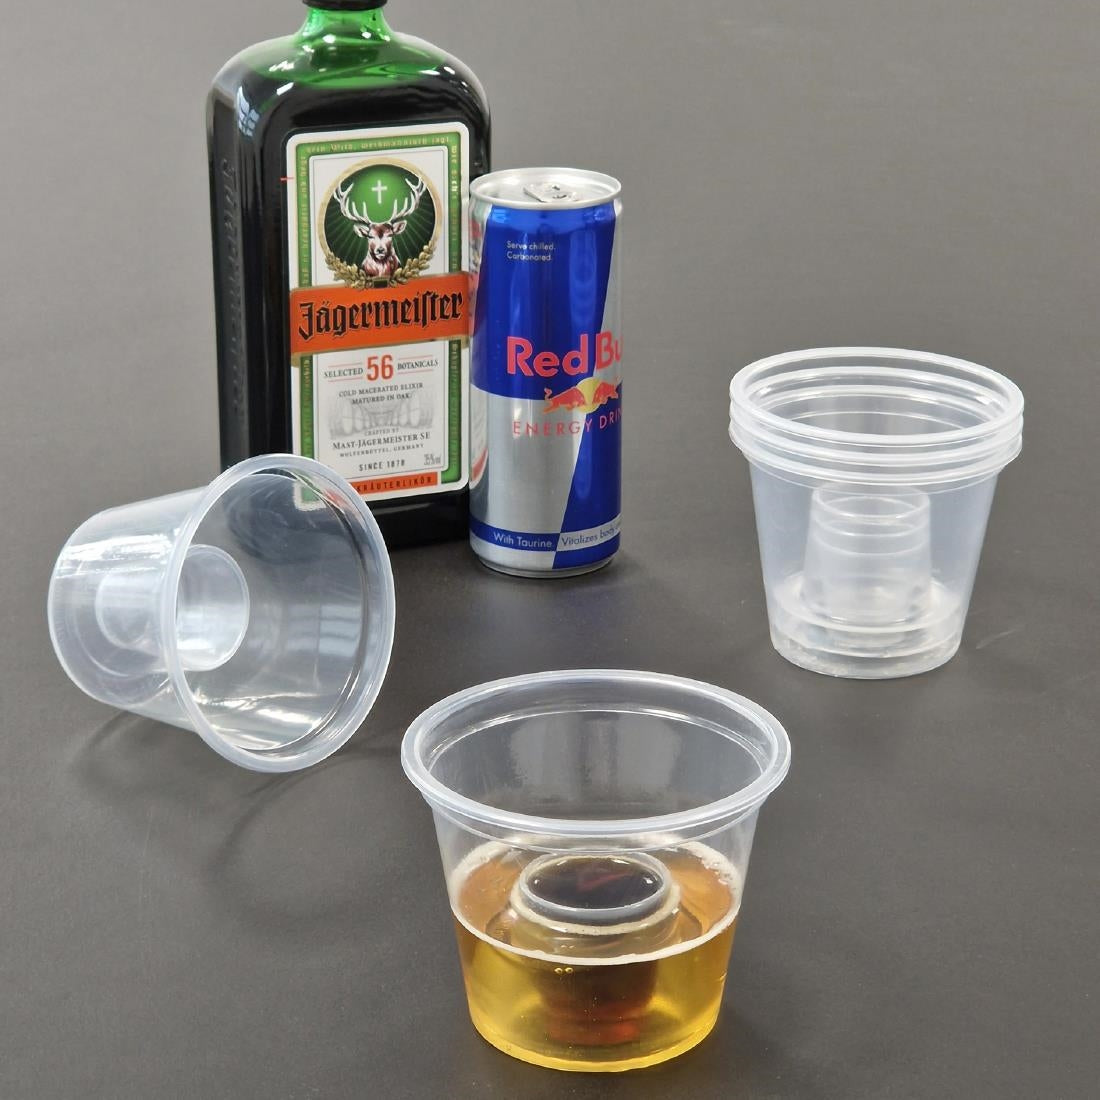 FU898 eGreen Bomb Shot Glasses UKCA and CE Marked 25/90ml to Brim (Pack of of 1000)